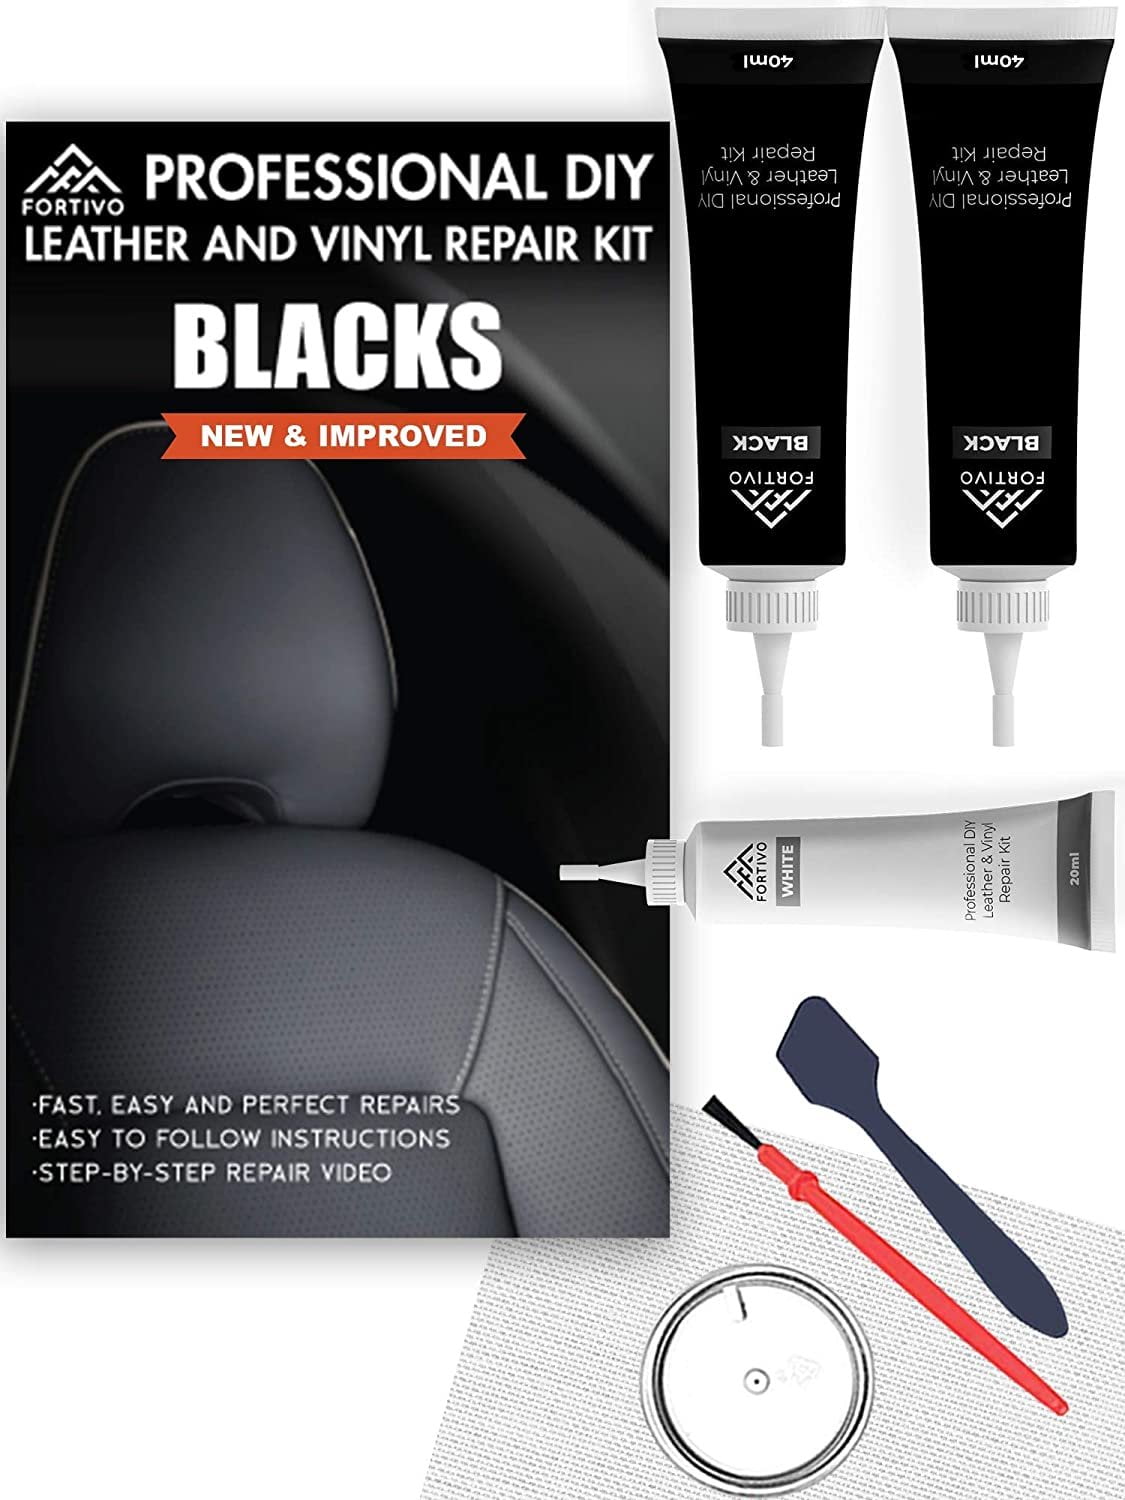 FORTIVO Black Leather and Vinyl Repair Kit - Furniture, Couch, Car Seats, Sofa, Jacket